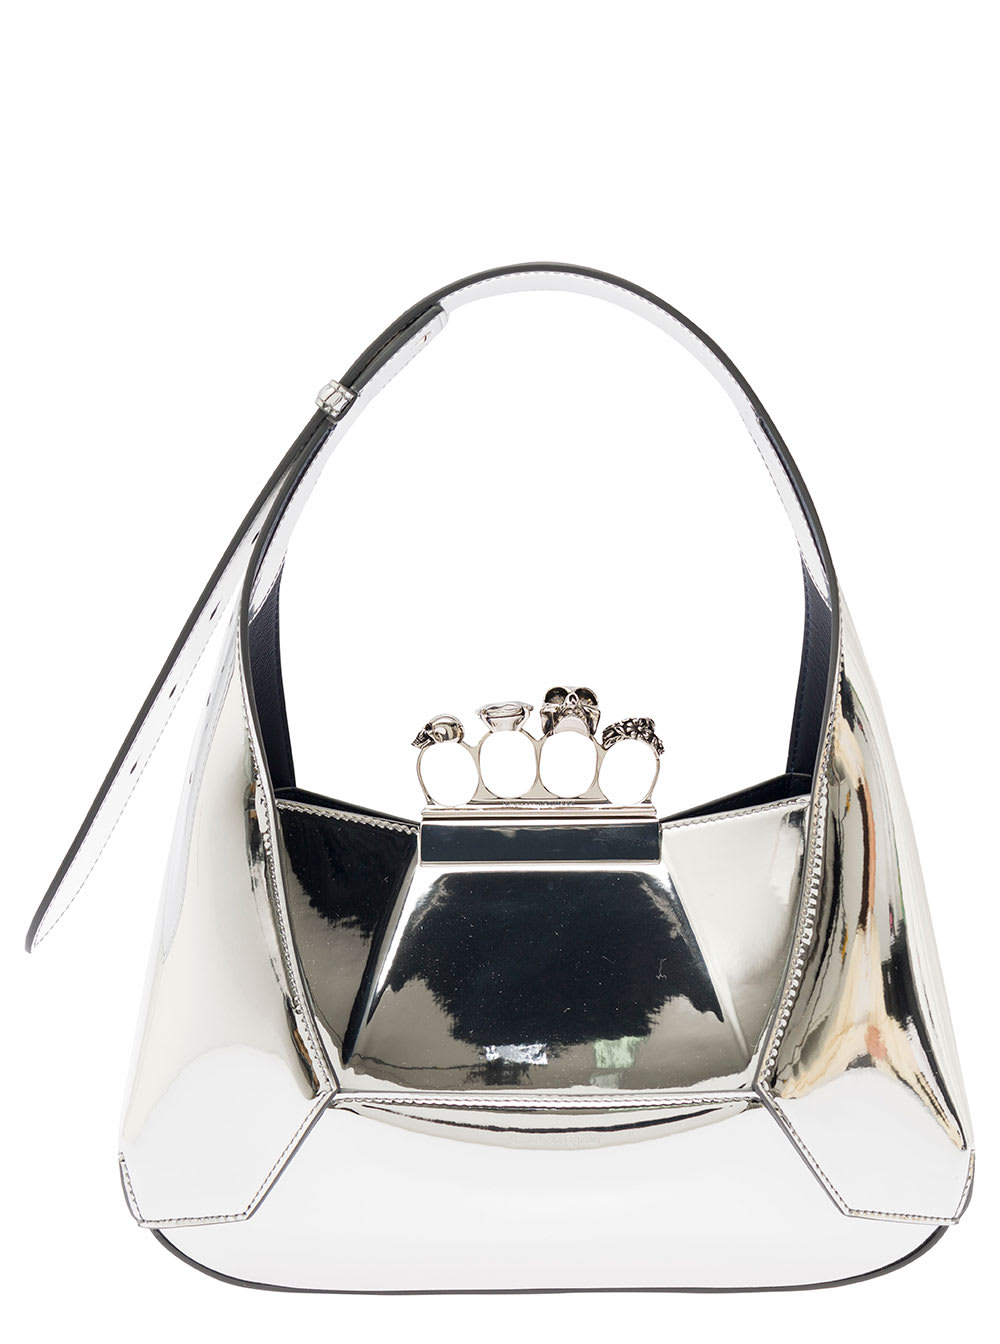 Silver Hobo Bag With Four Rings Detail In Metallic Fabric Woman